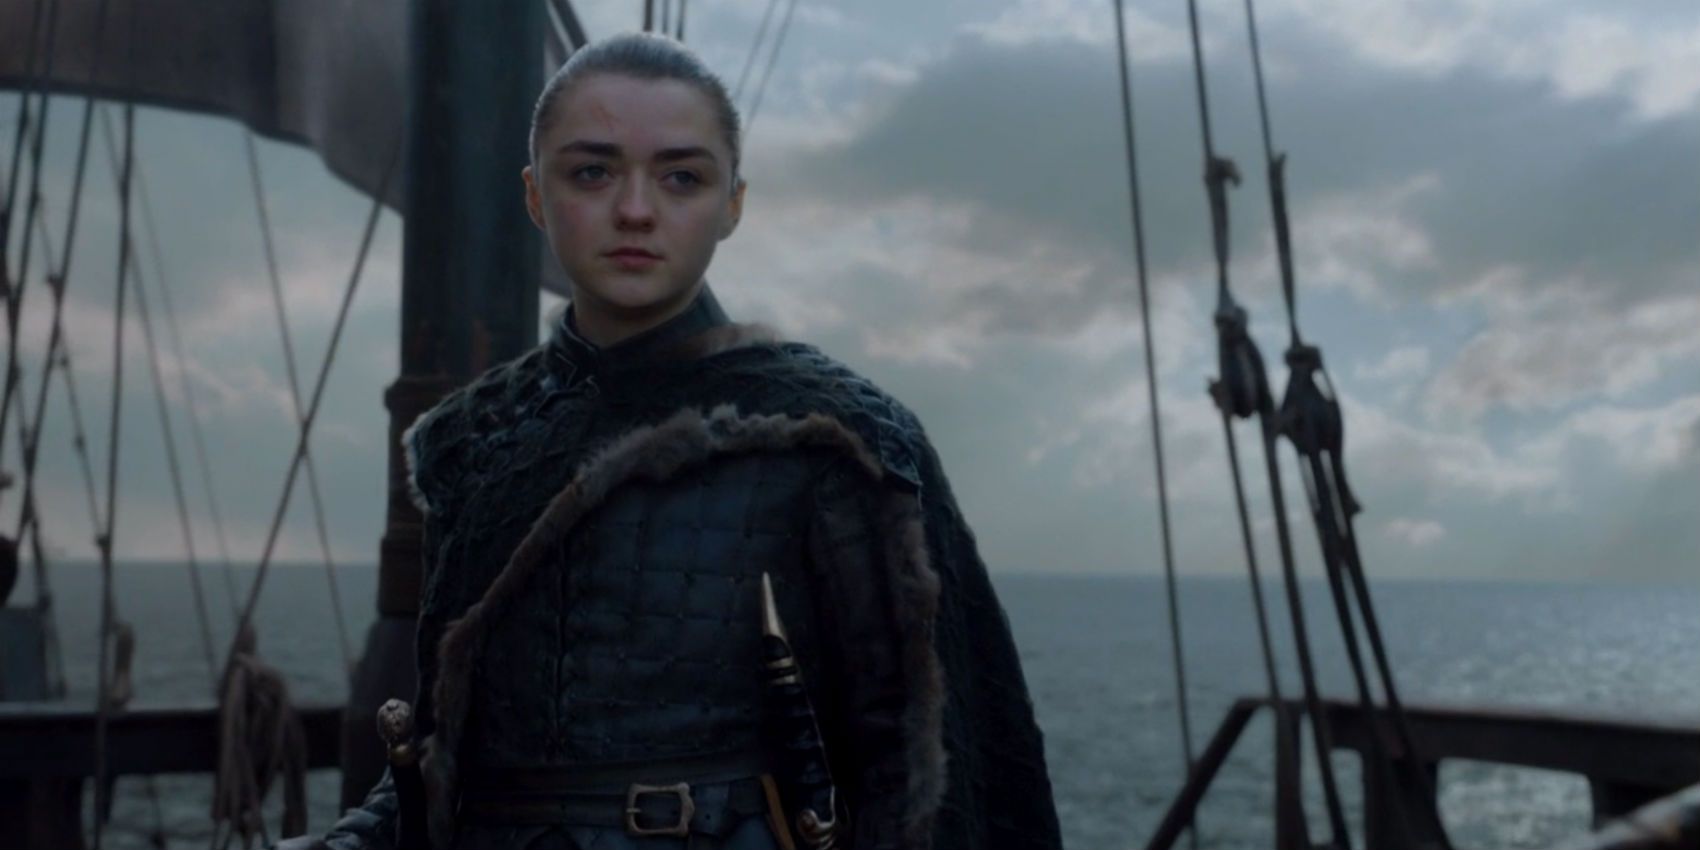 Arya stands on a ship's deck in the Game of Thrones finale